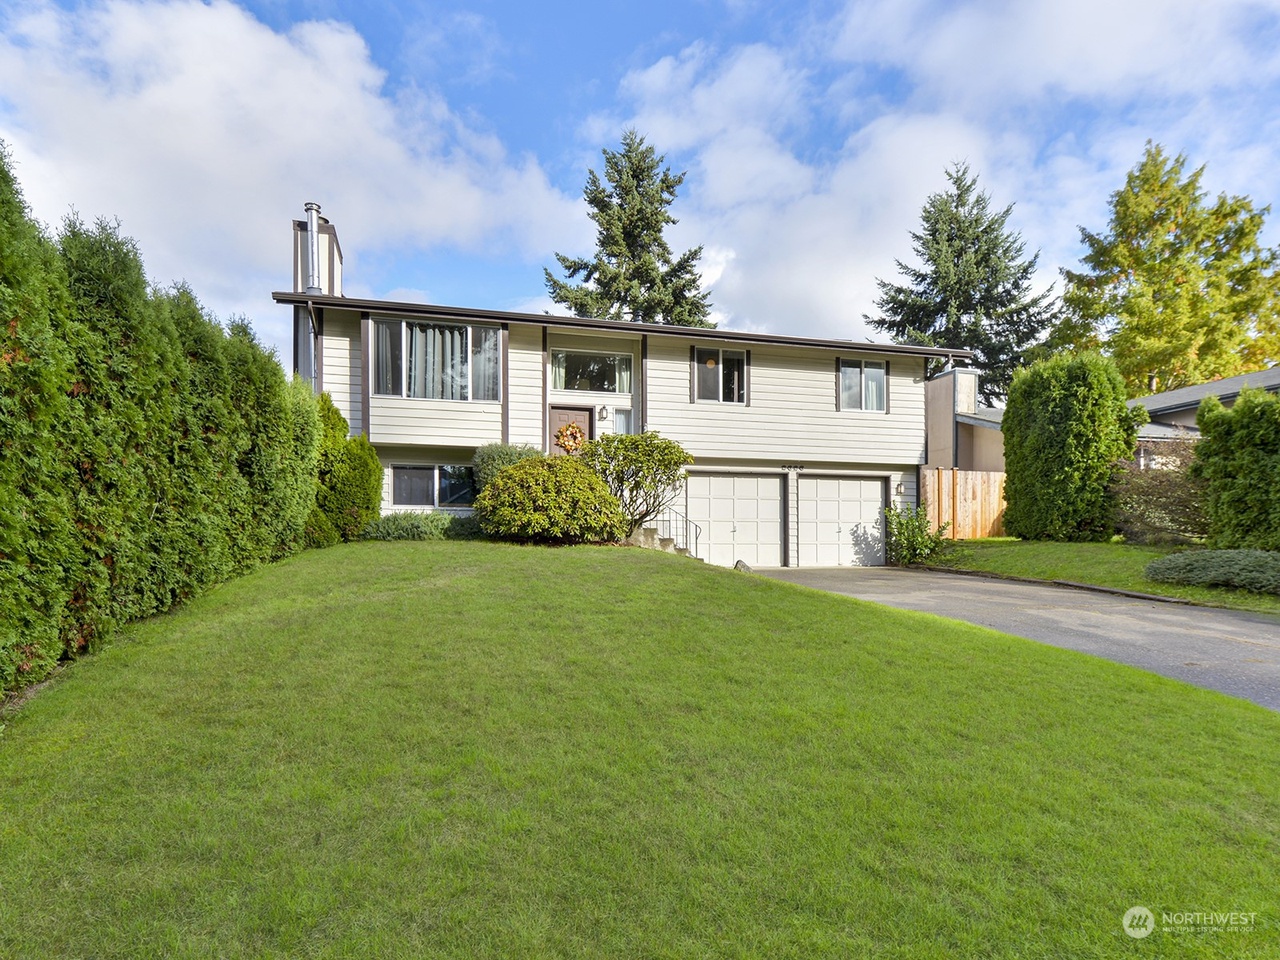 2626 S 377th St, Federal Way, WA 98003 | MLS# 2175213 | Redfin